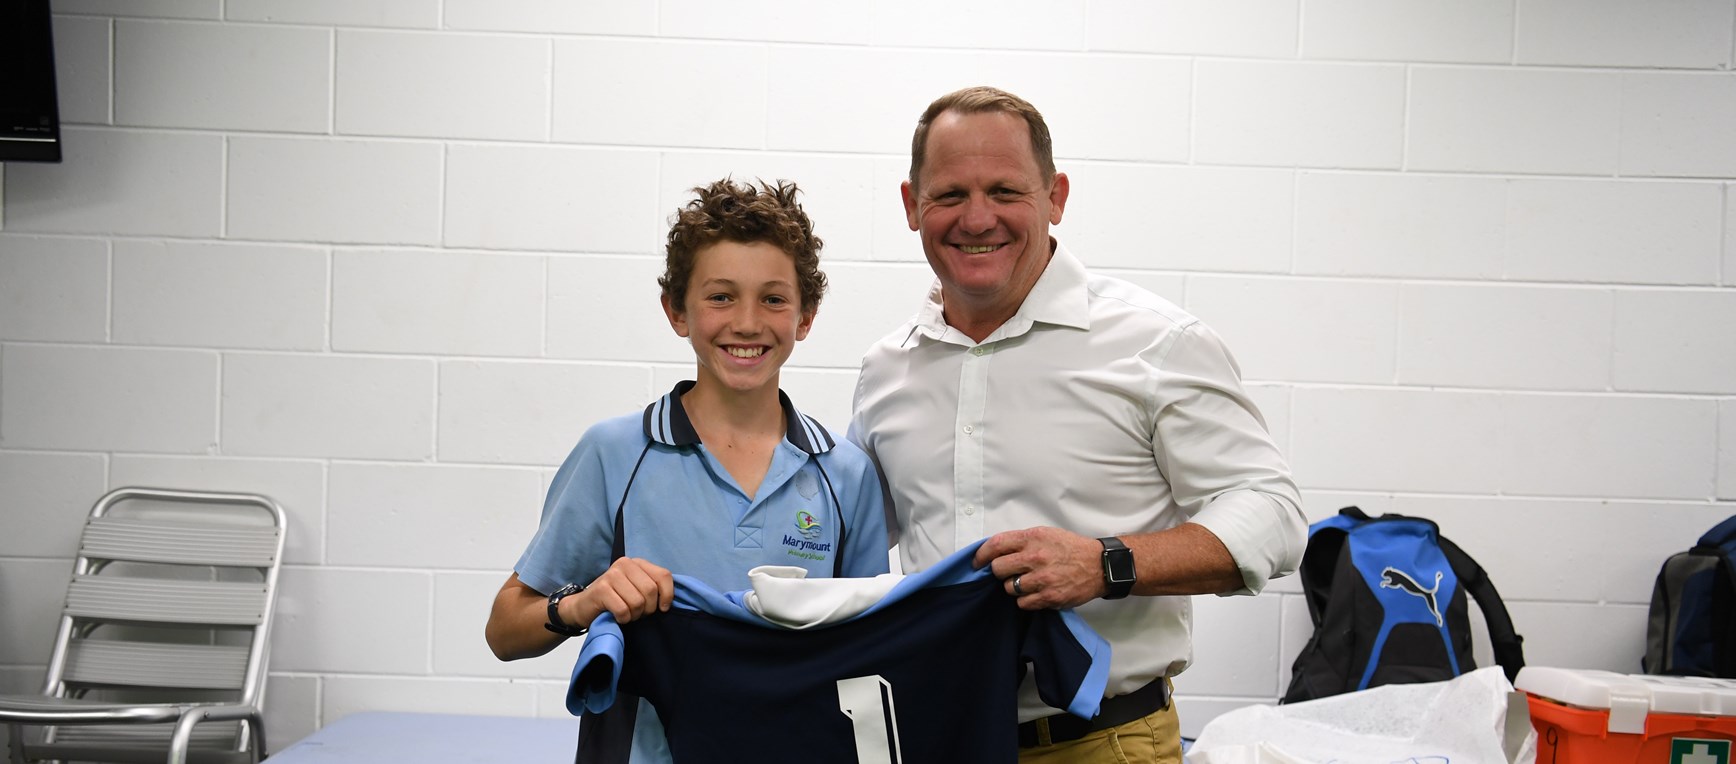 Maroons coach presents jerseys to NRL Development Cup teams